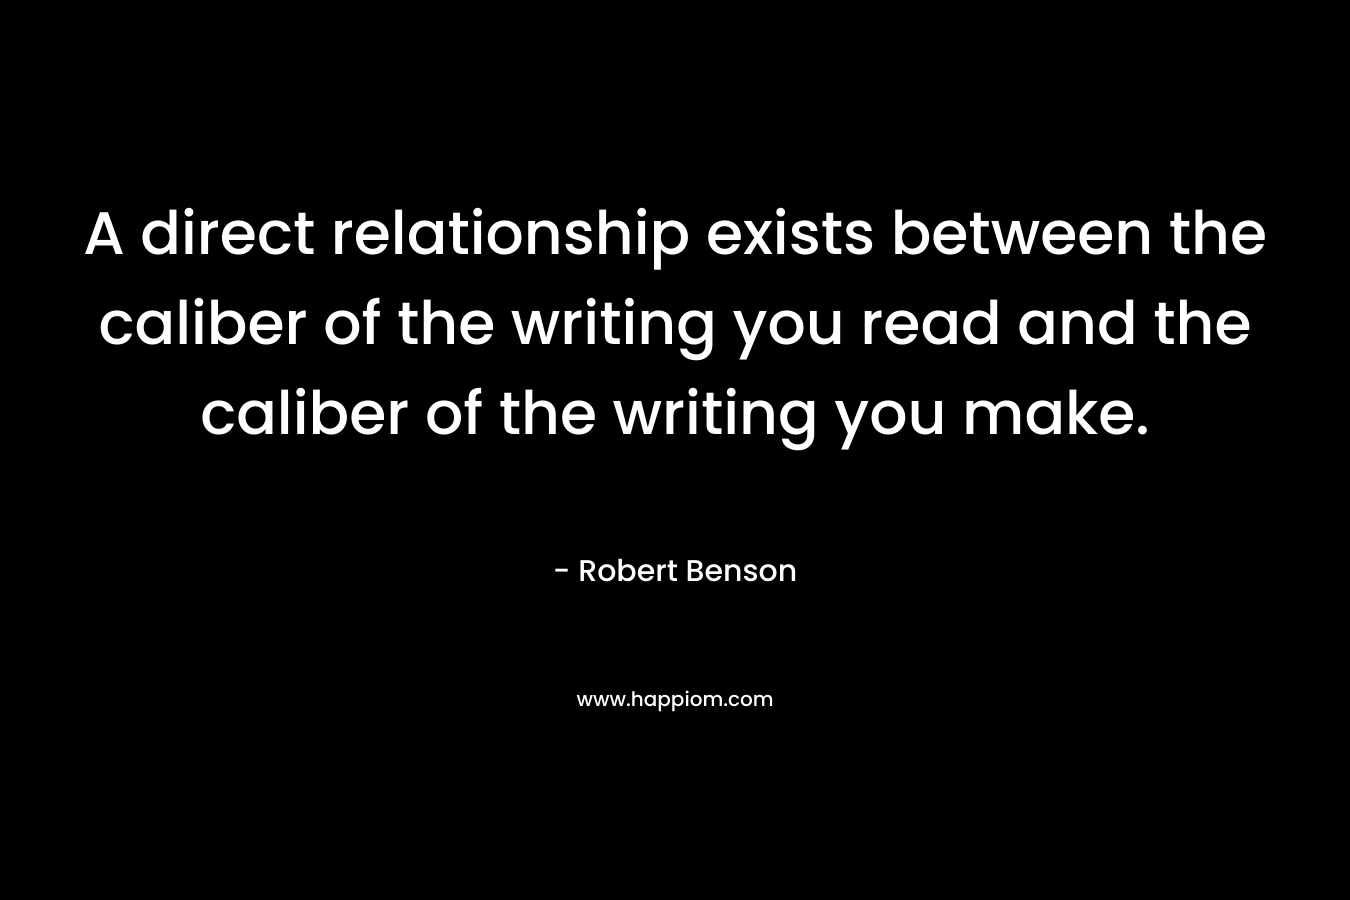 A direct relationship exists between the caliber of the writing you read and the caliber of the writing you make. – Robert Benson